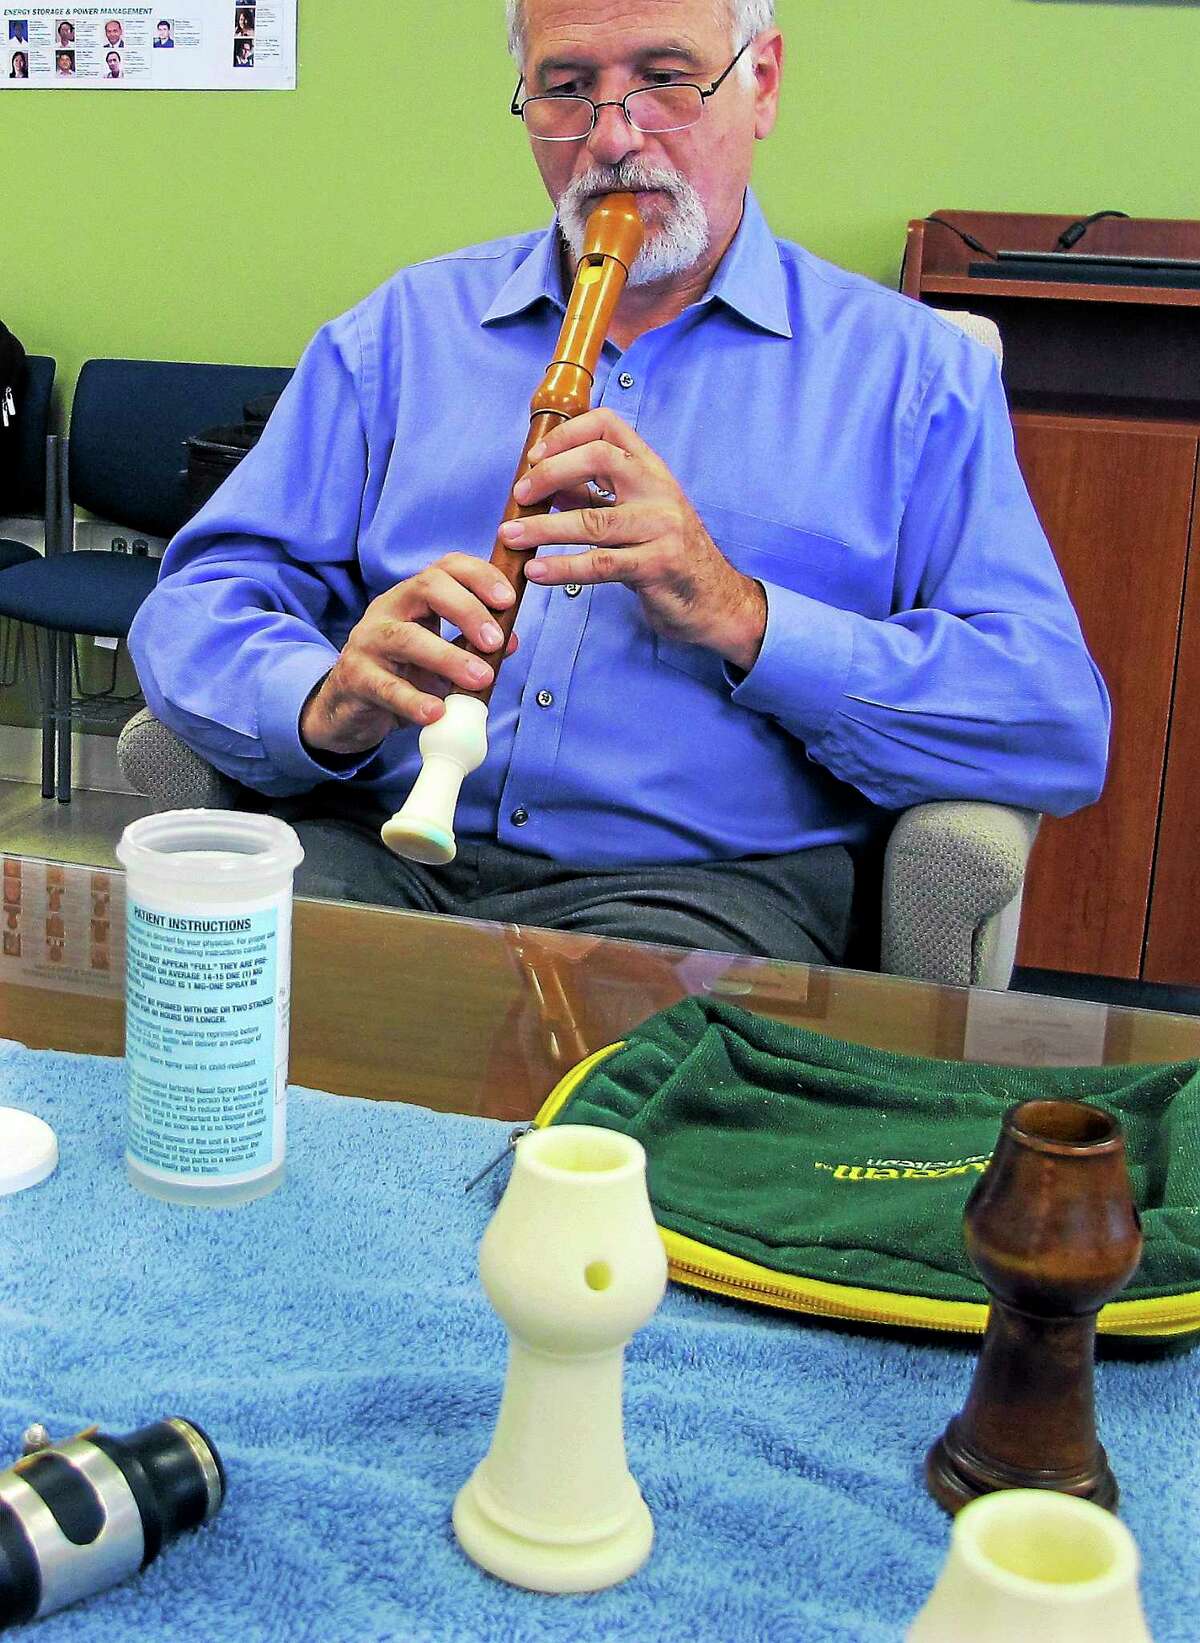 In this July 17, 2014 photo, Dr. Robert Howe, a medical doctor and a PhD candidate in music history, plays an antique recorder that was repaired using a 3D printing of the instrument’s original bell, at the University of Connecticut’s Depot Campus in Mansfield, Conn.